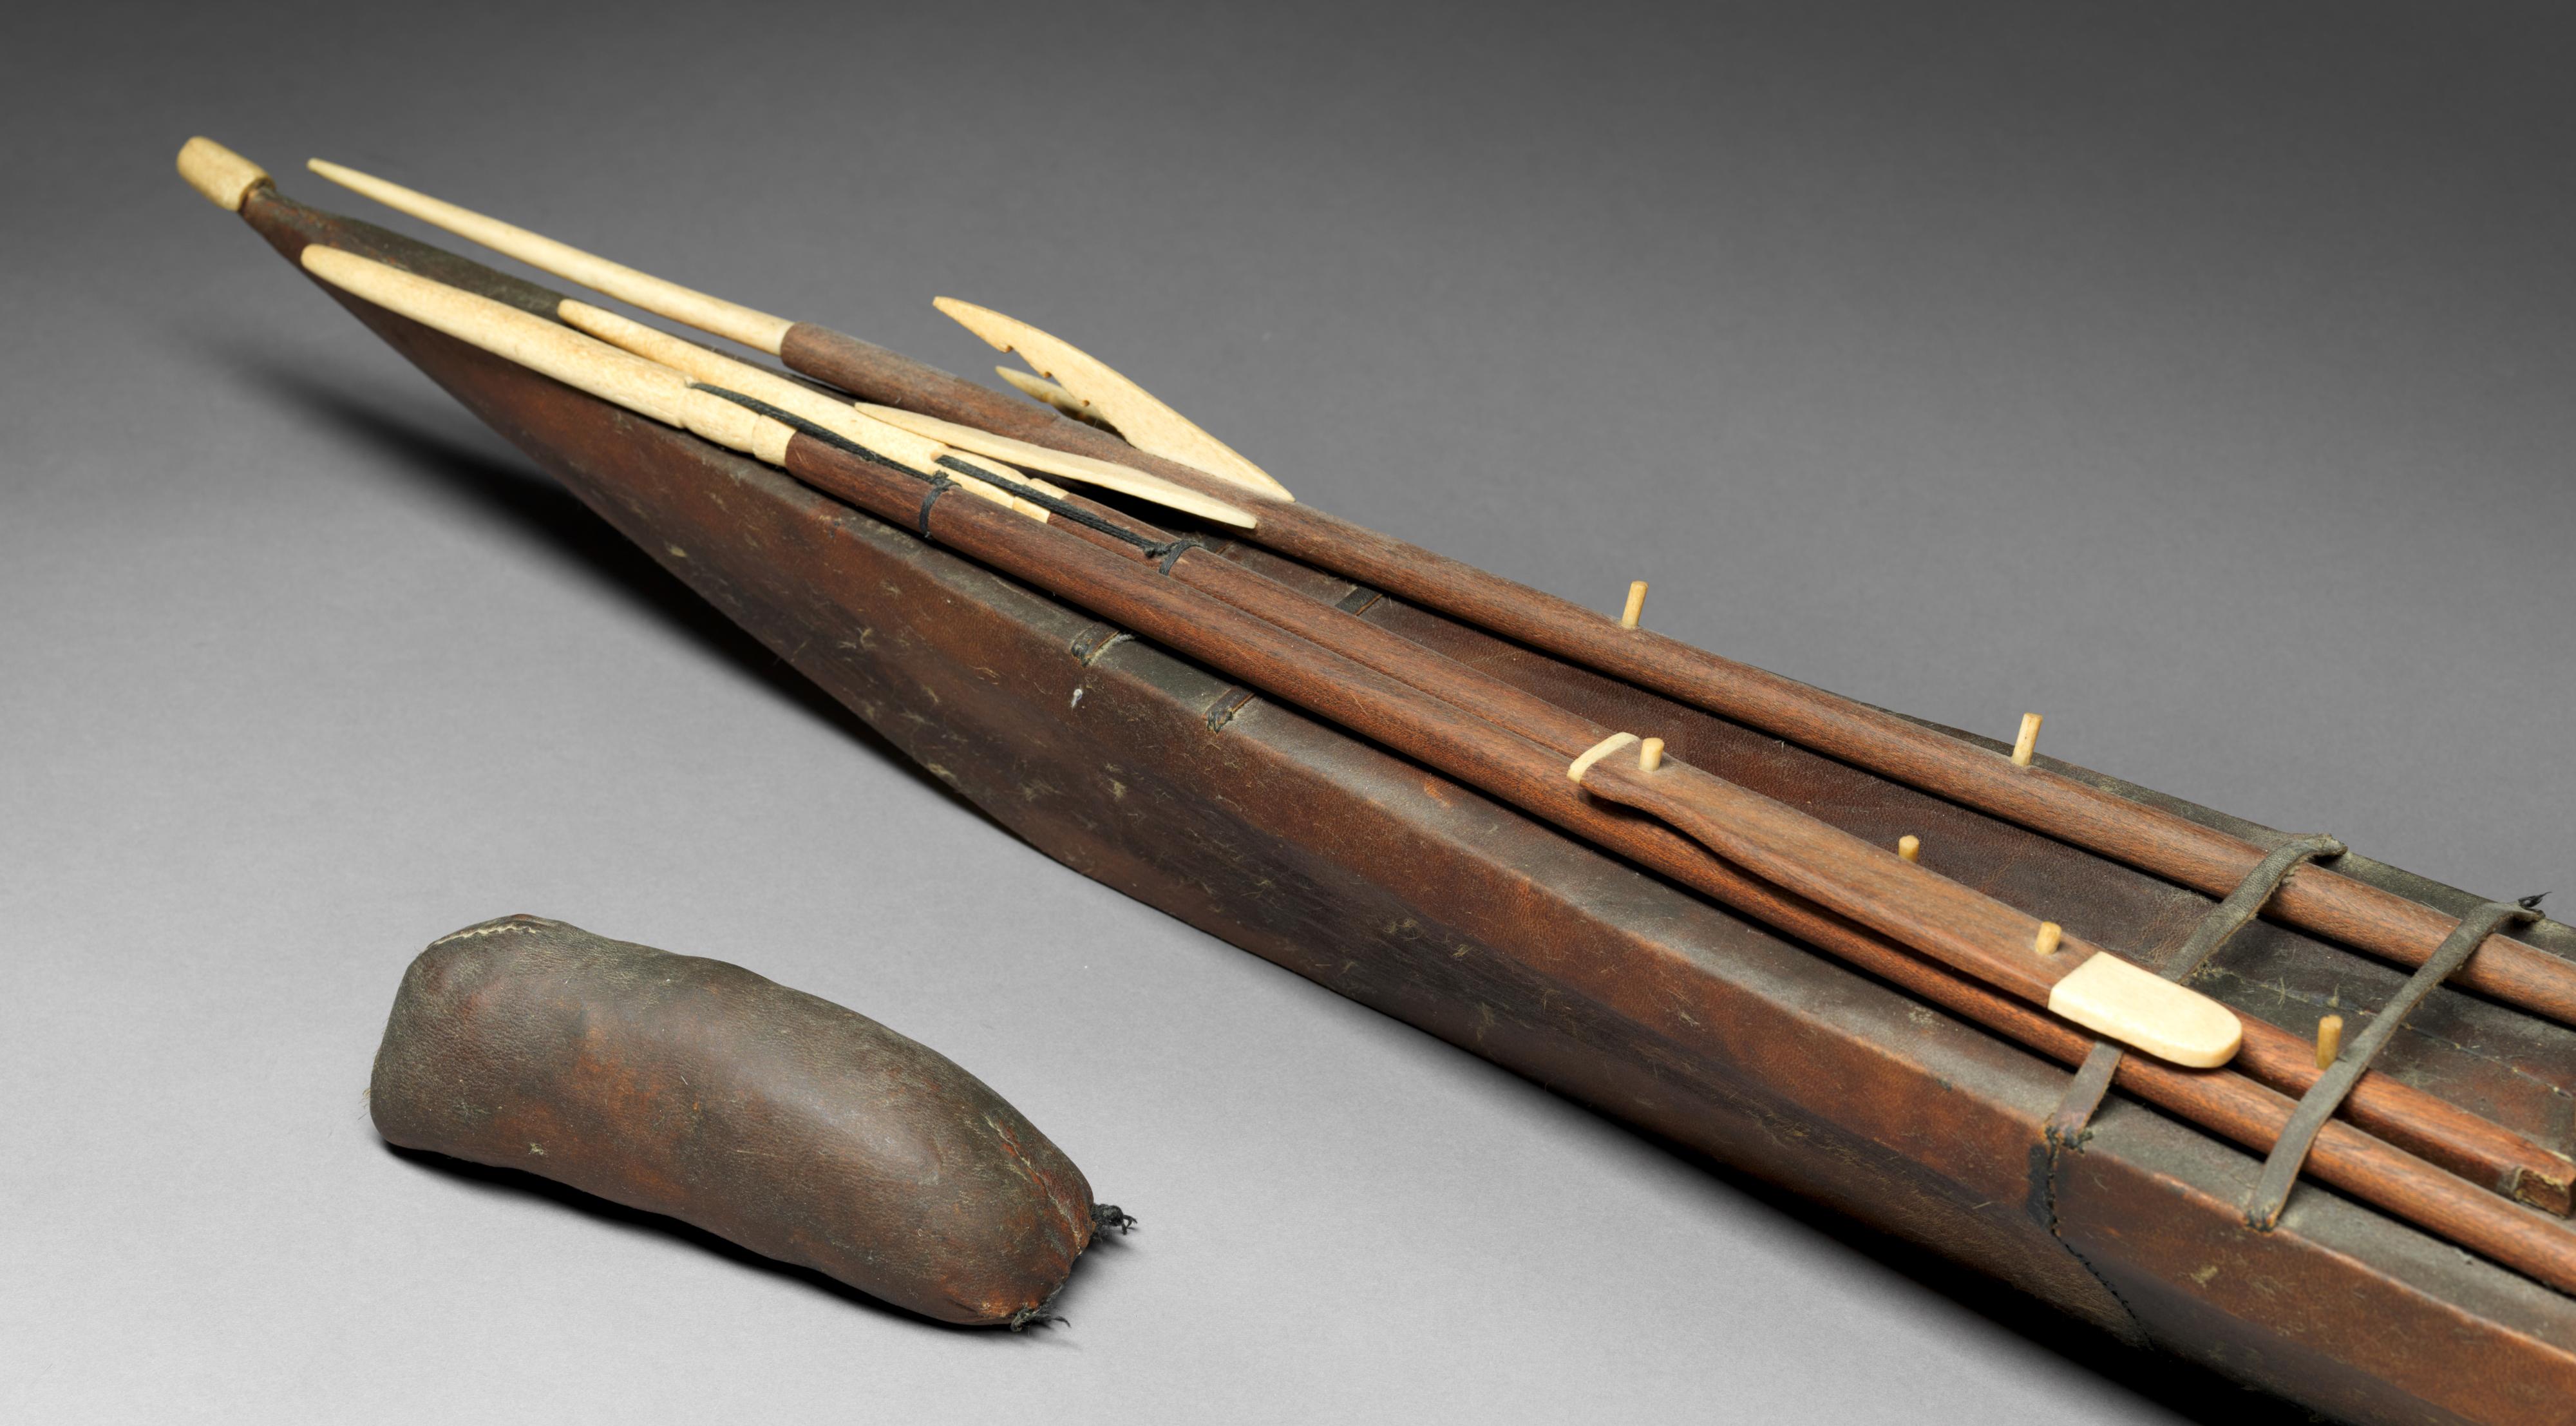 What makes this model so special is that all the hunting devices are still present: spears, harpoons, spear thrower, wood float board, and bladder, paddles and other equipment used for seal hunting. Please note how well these are made in a stunning